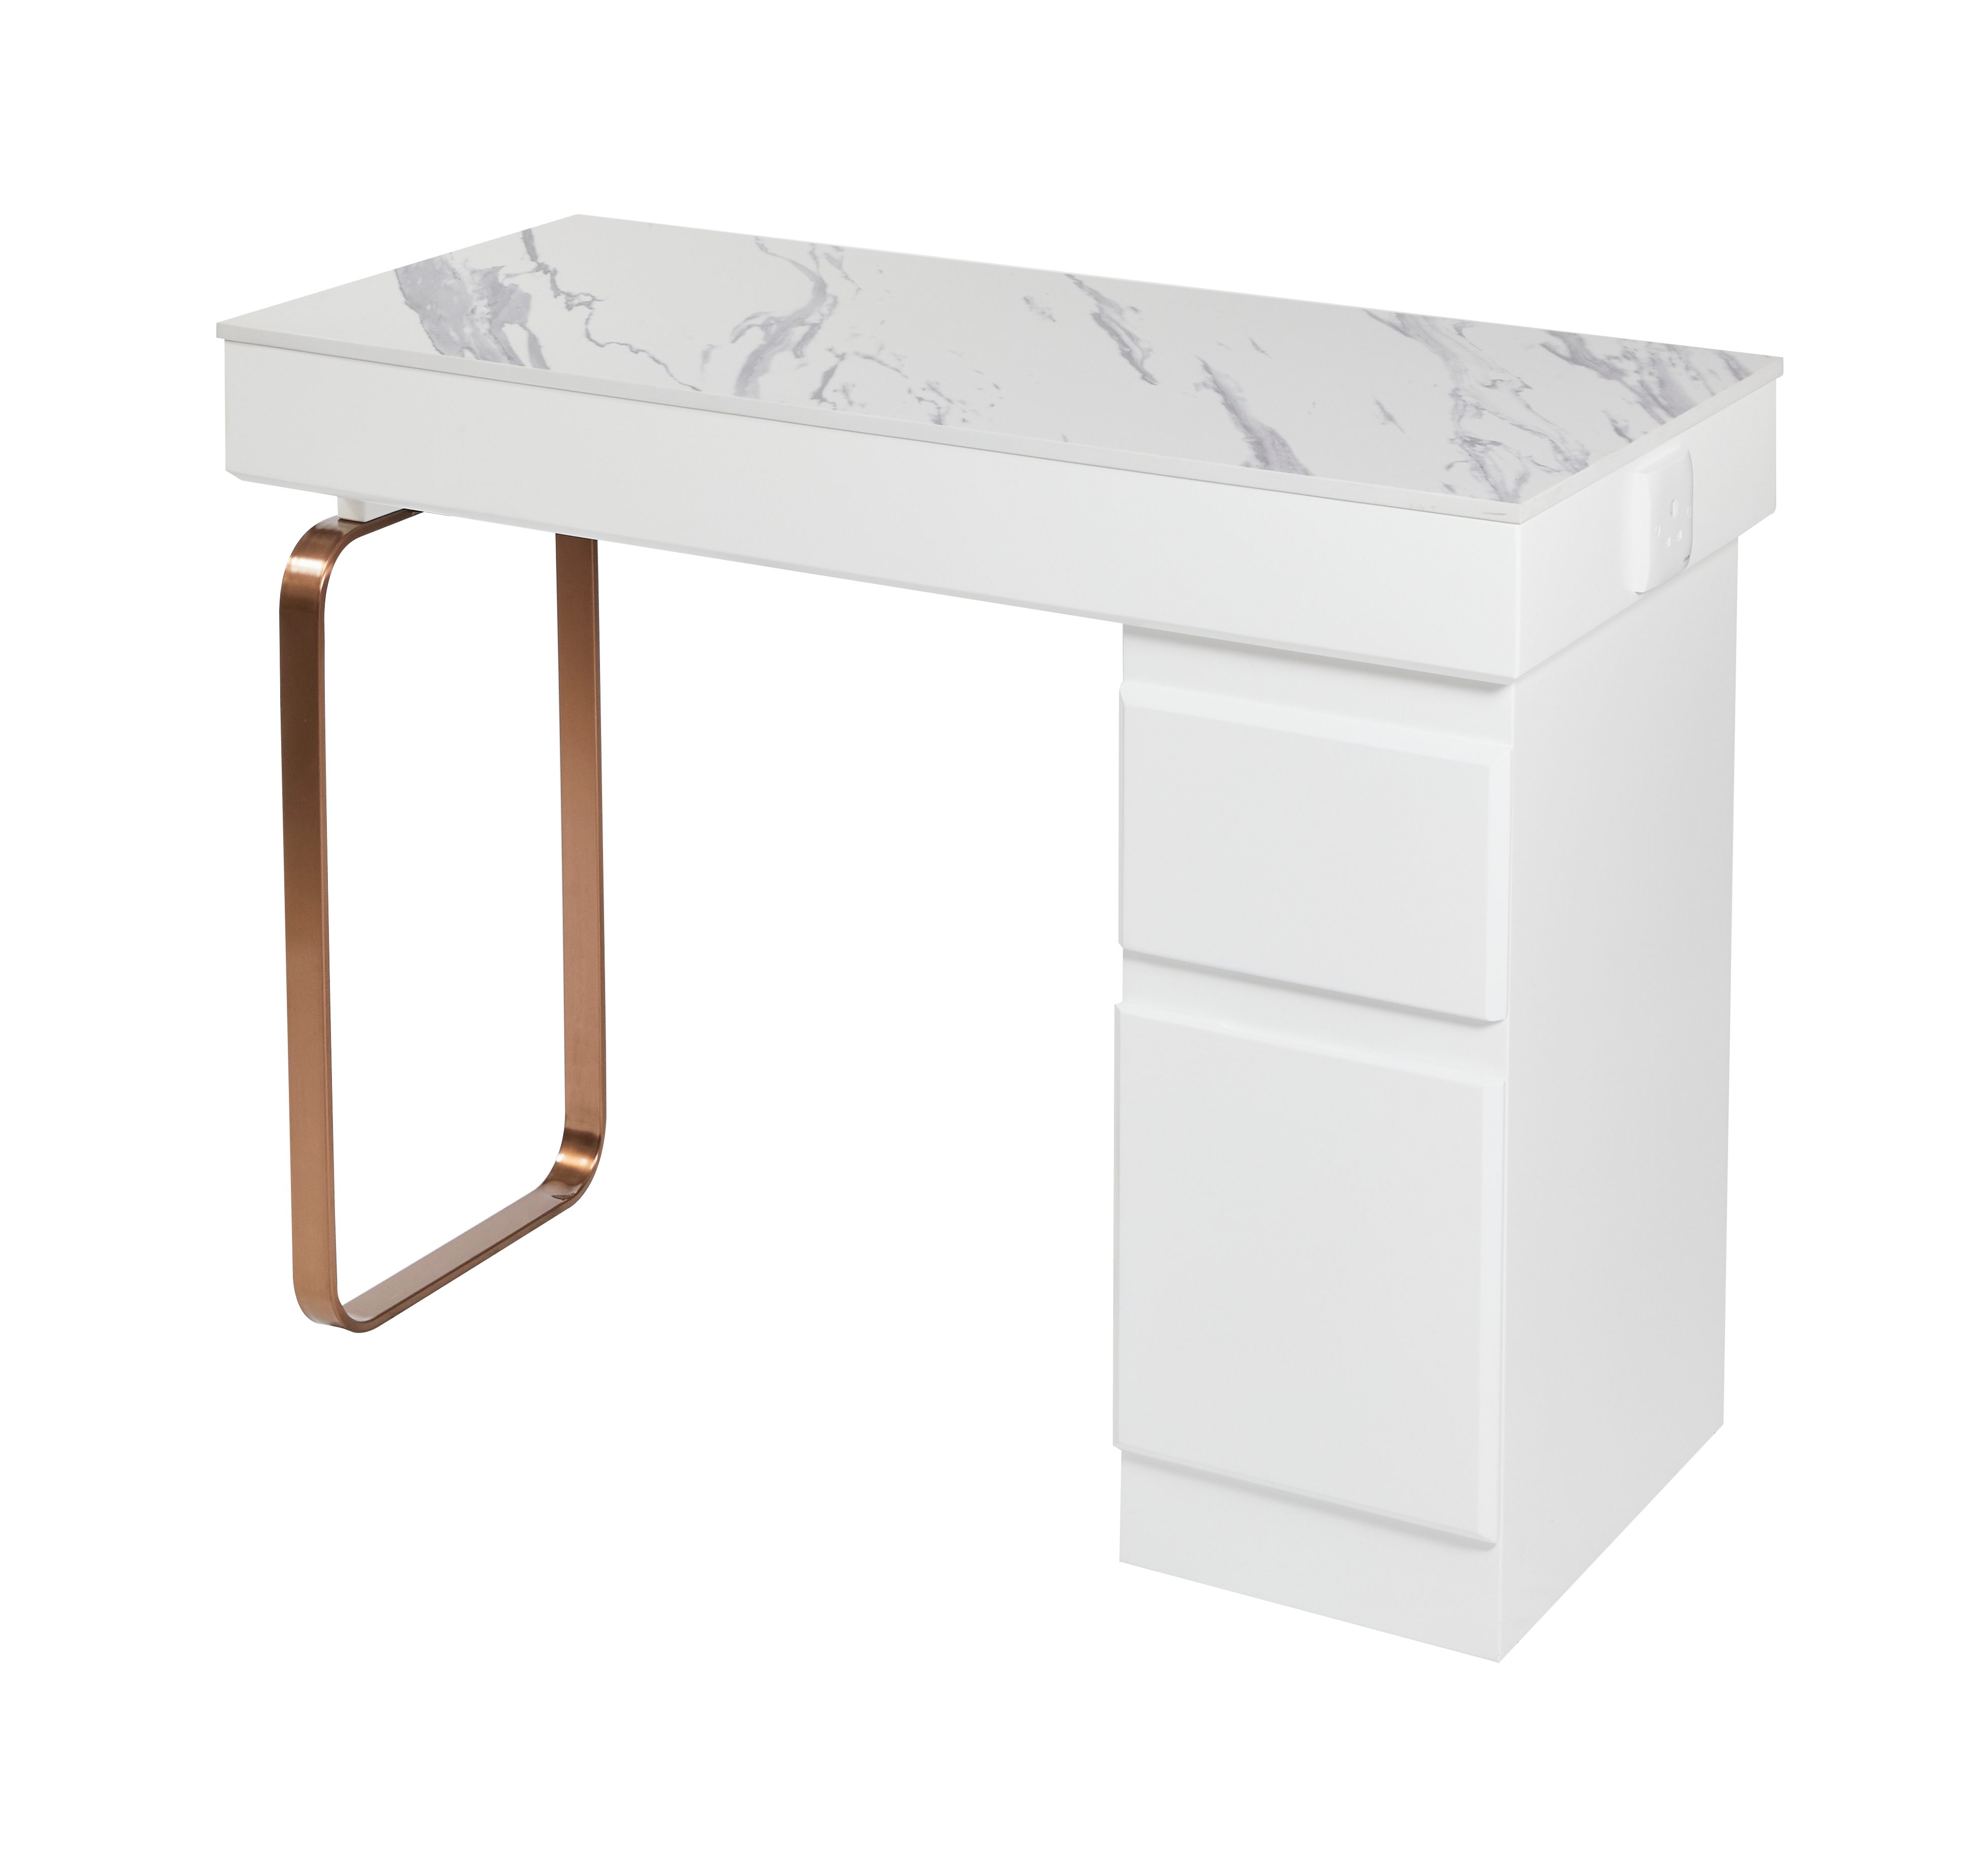 The Maia Nail Desk with White Patterned Stone Top - Copper & White by SEC